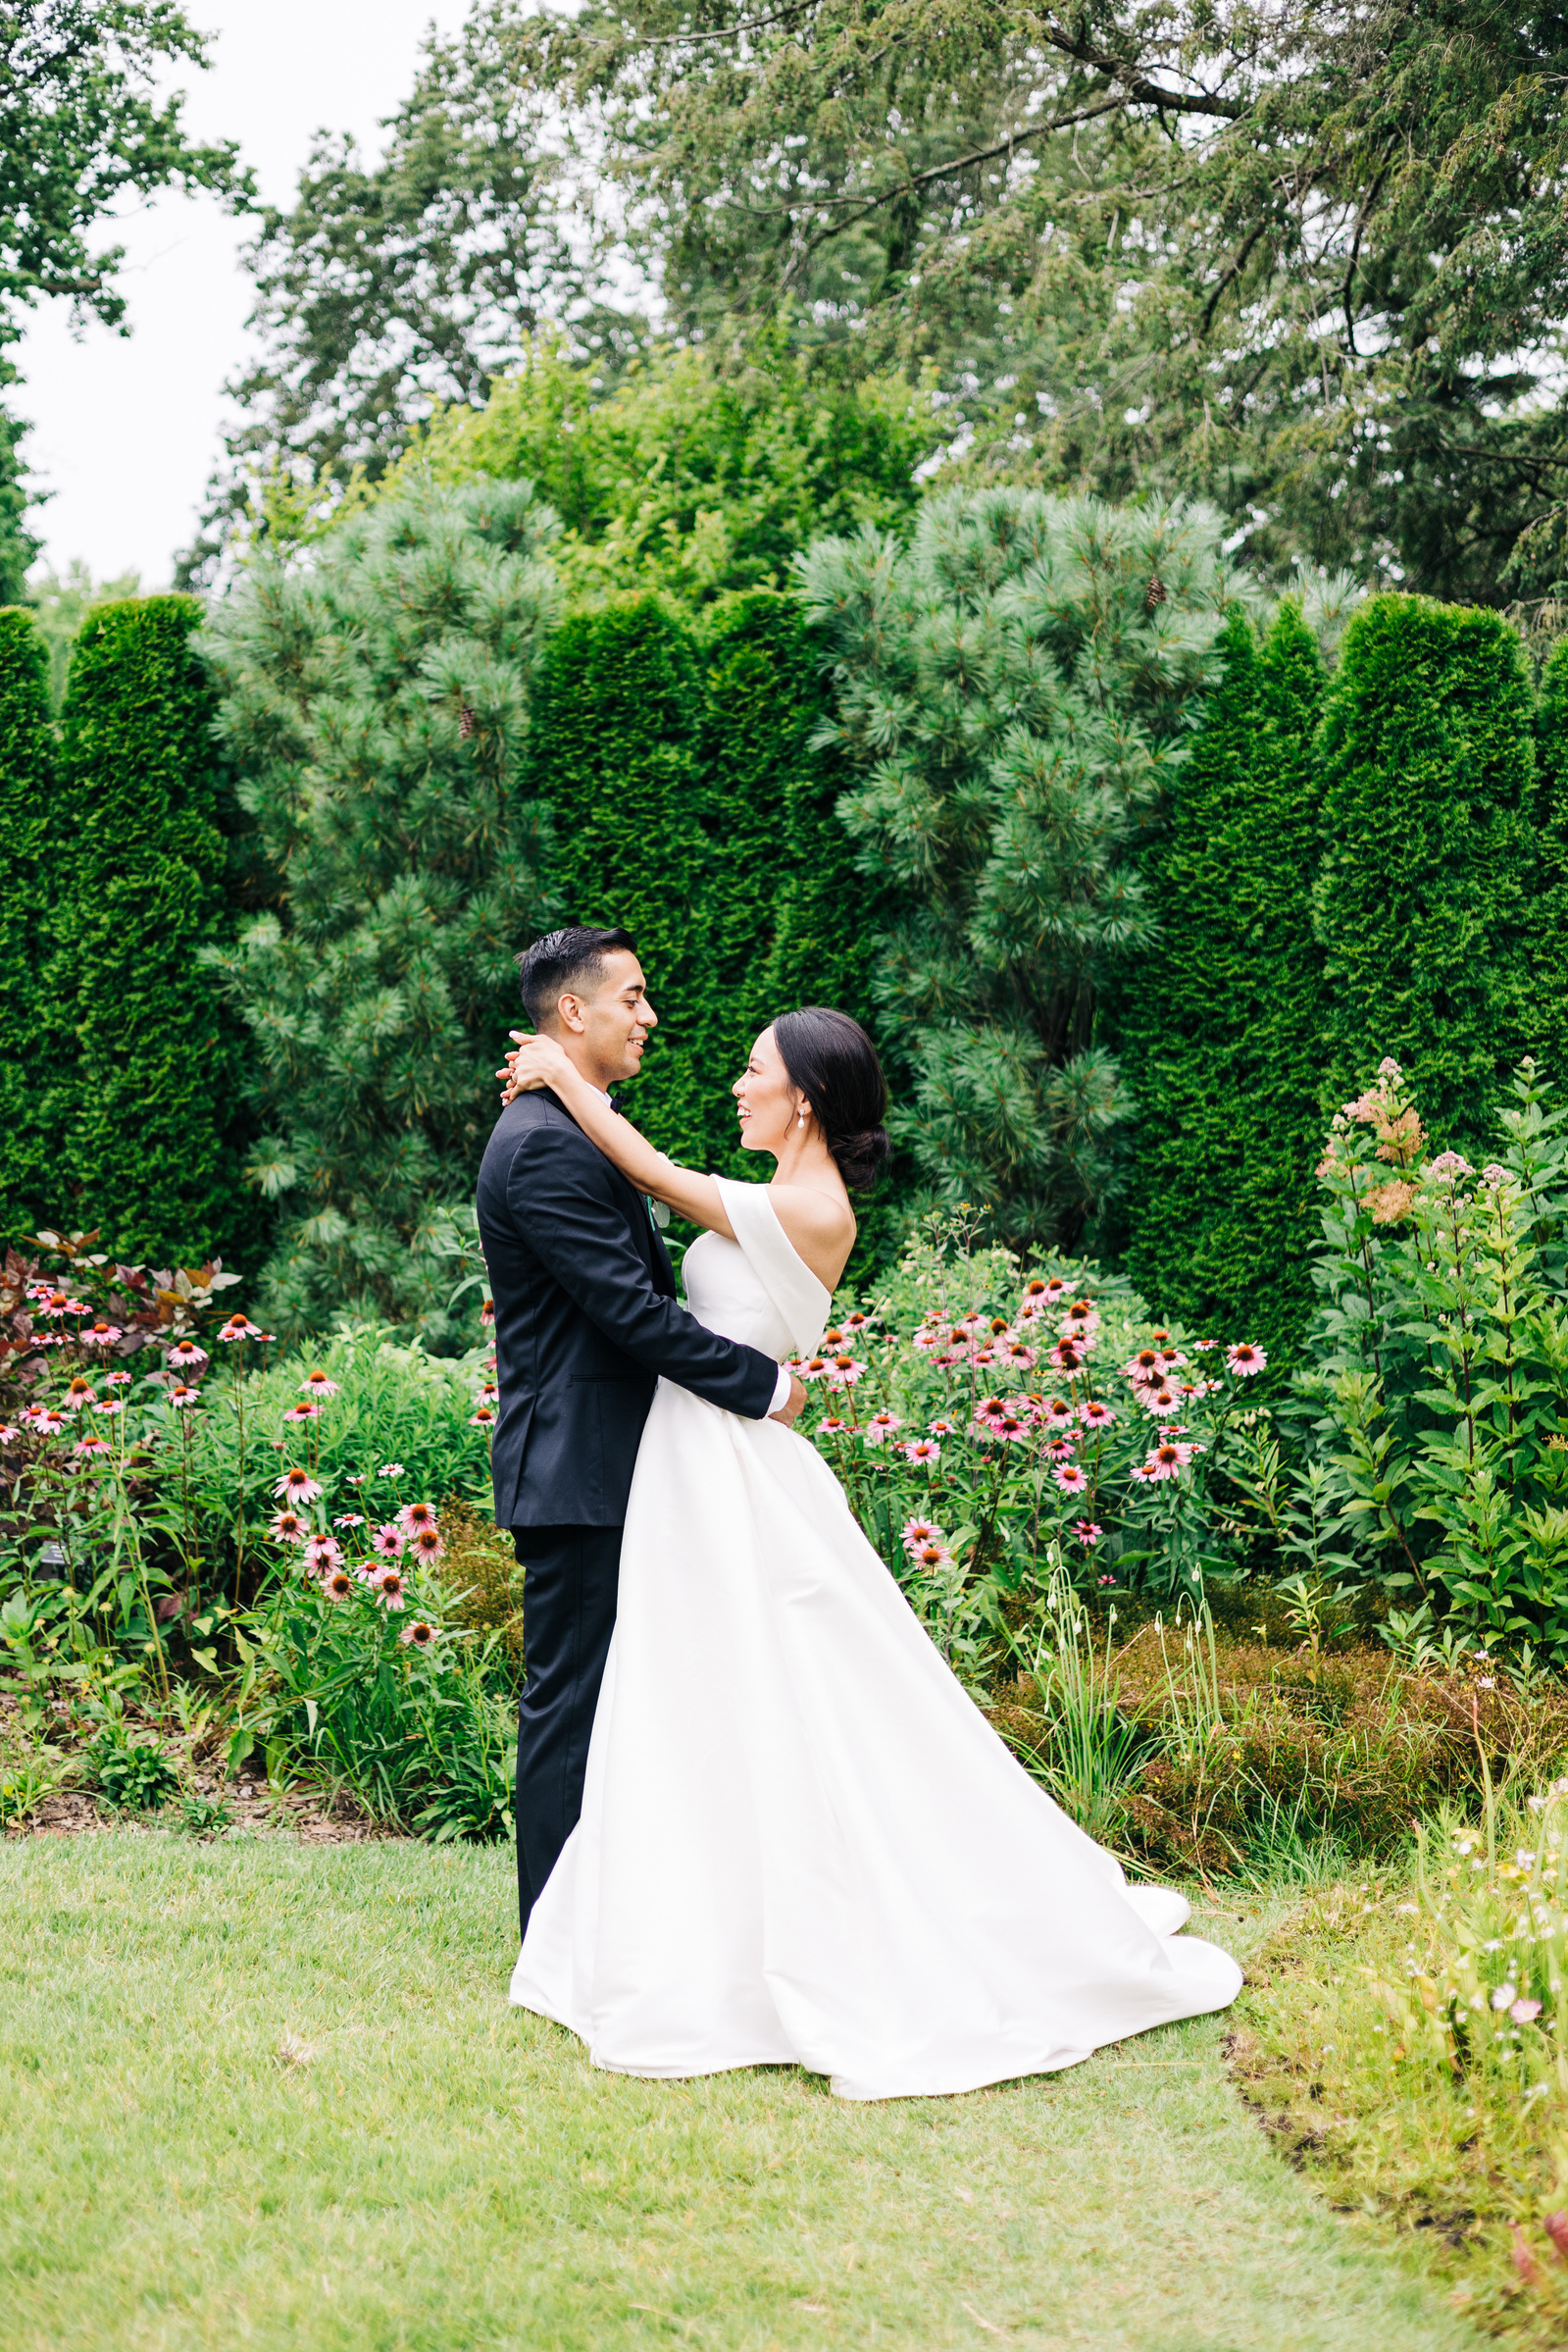 bride and groom standing in a garden and embracing during their wedding portraits with greenery and pink flowers in background